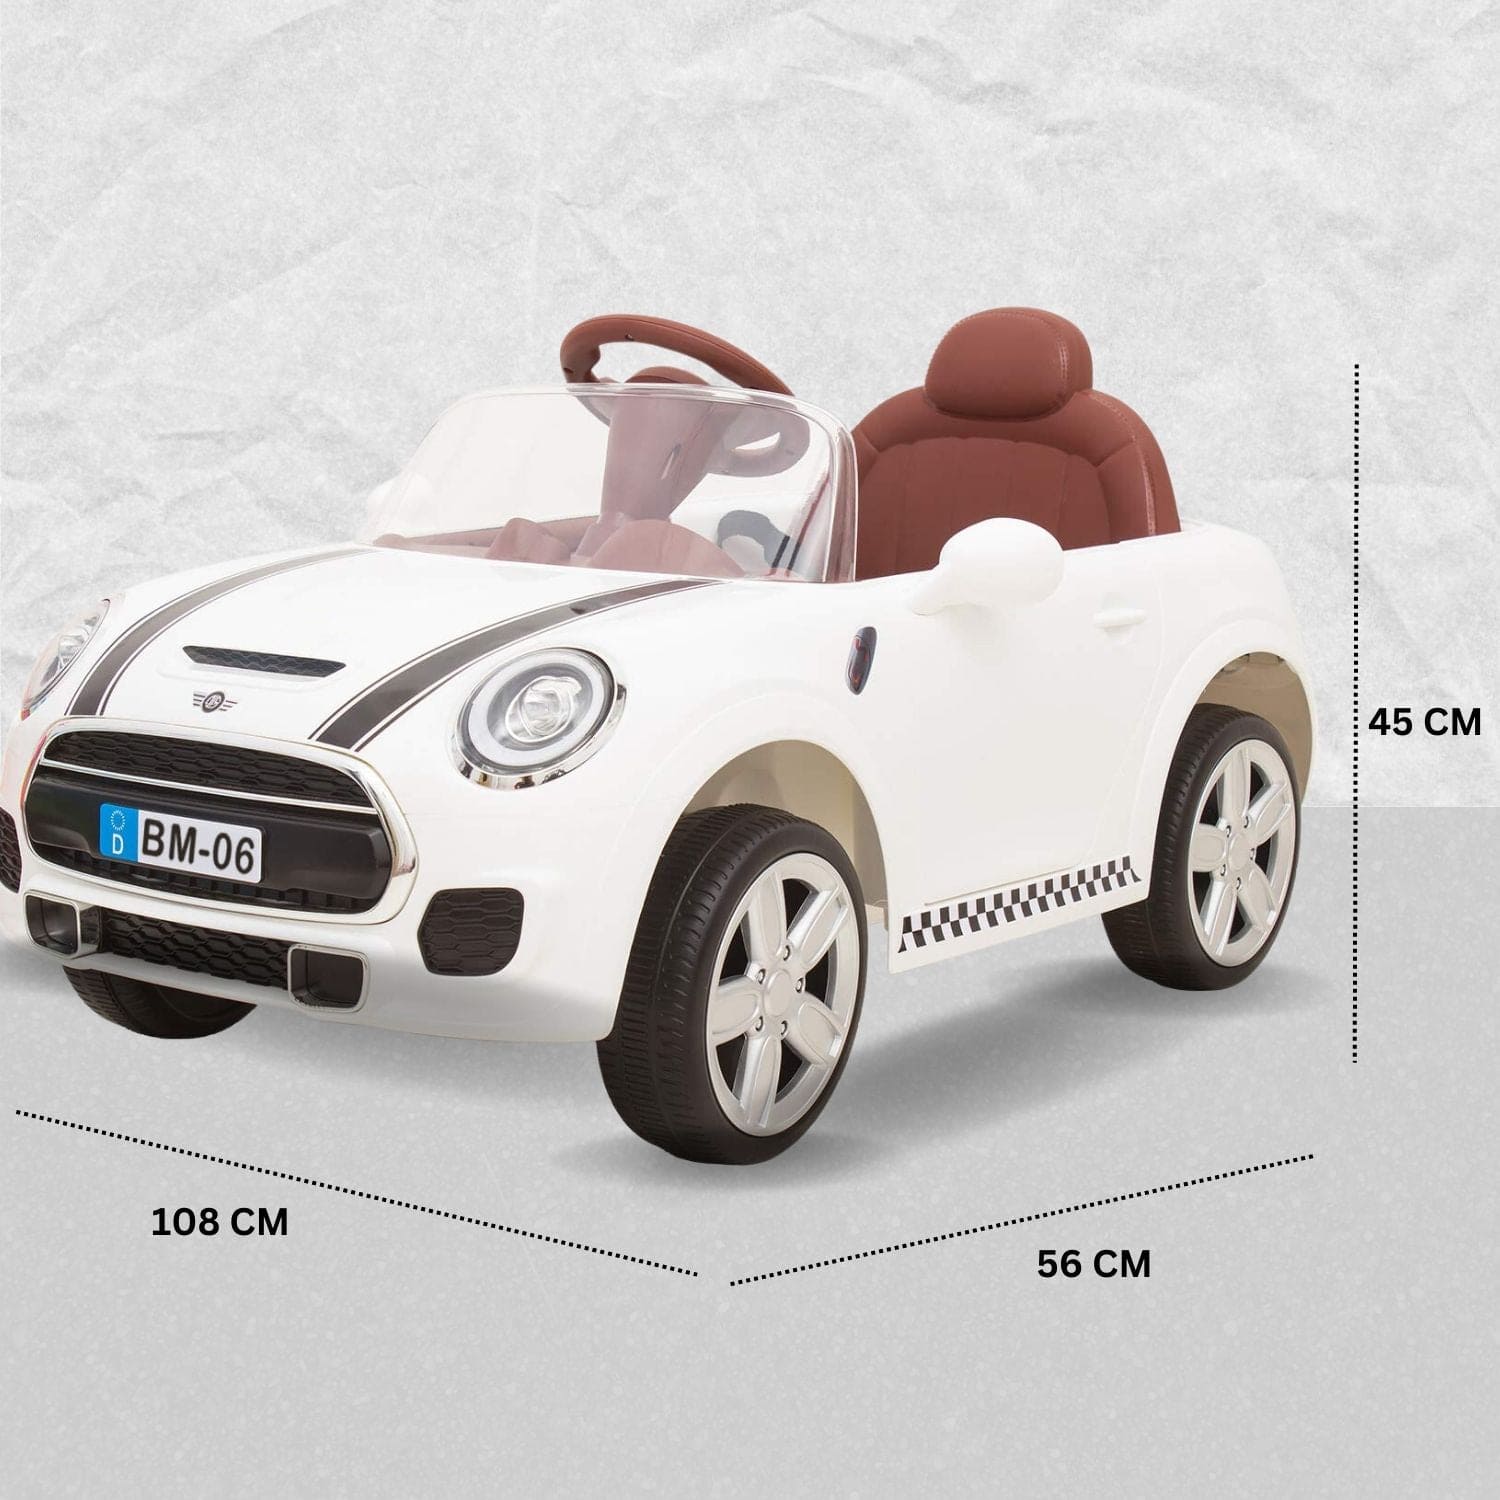 Baby Moo Mini Cooper Electric Ride-On Car for Kids | Rechargeable 12V Battery | Remote Control | USB MP3 Player | Ages 1-5 - White